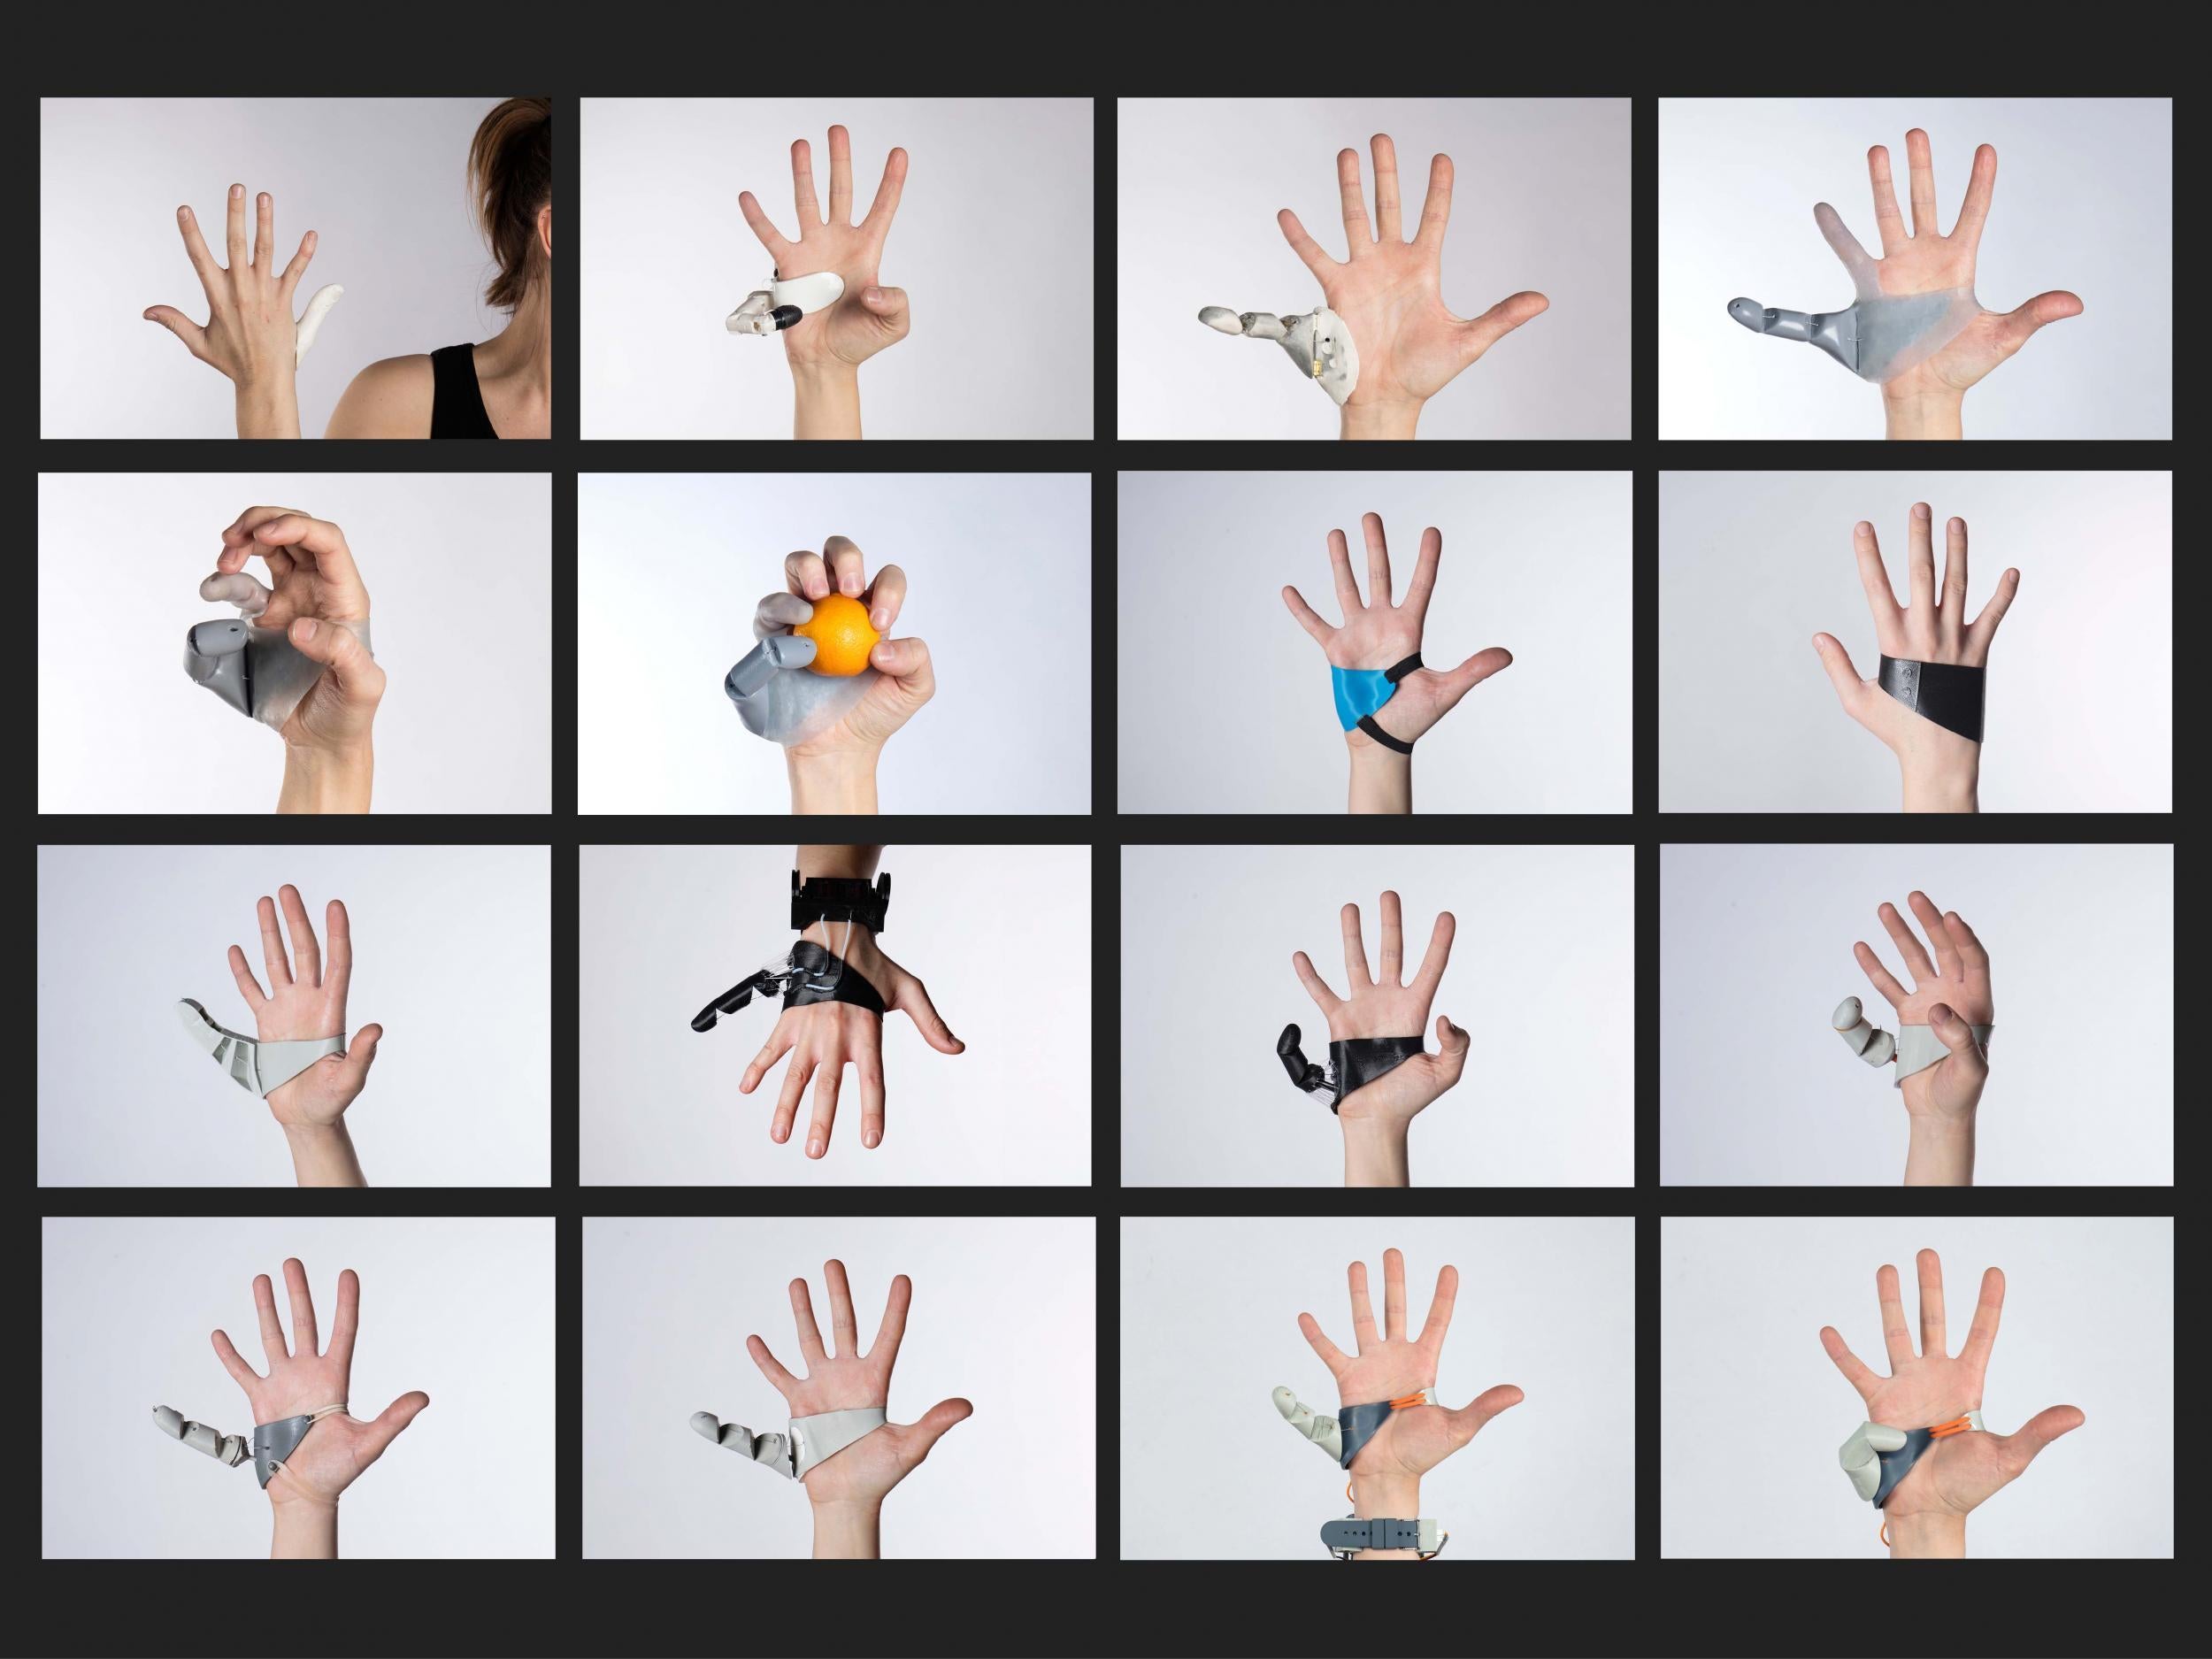 Dani Clode, a student of the RCA, created a 'third thumb' as part of her MA dissertation project